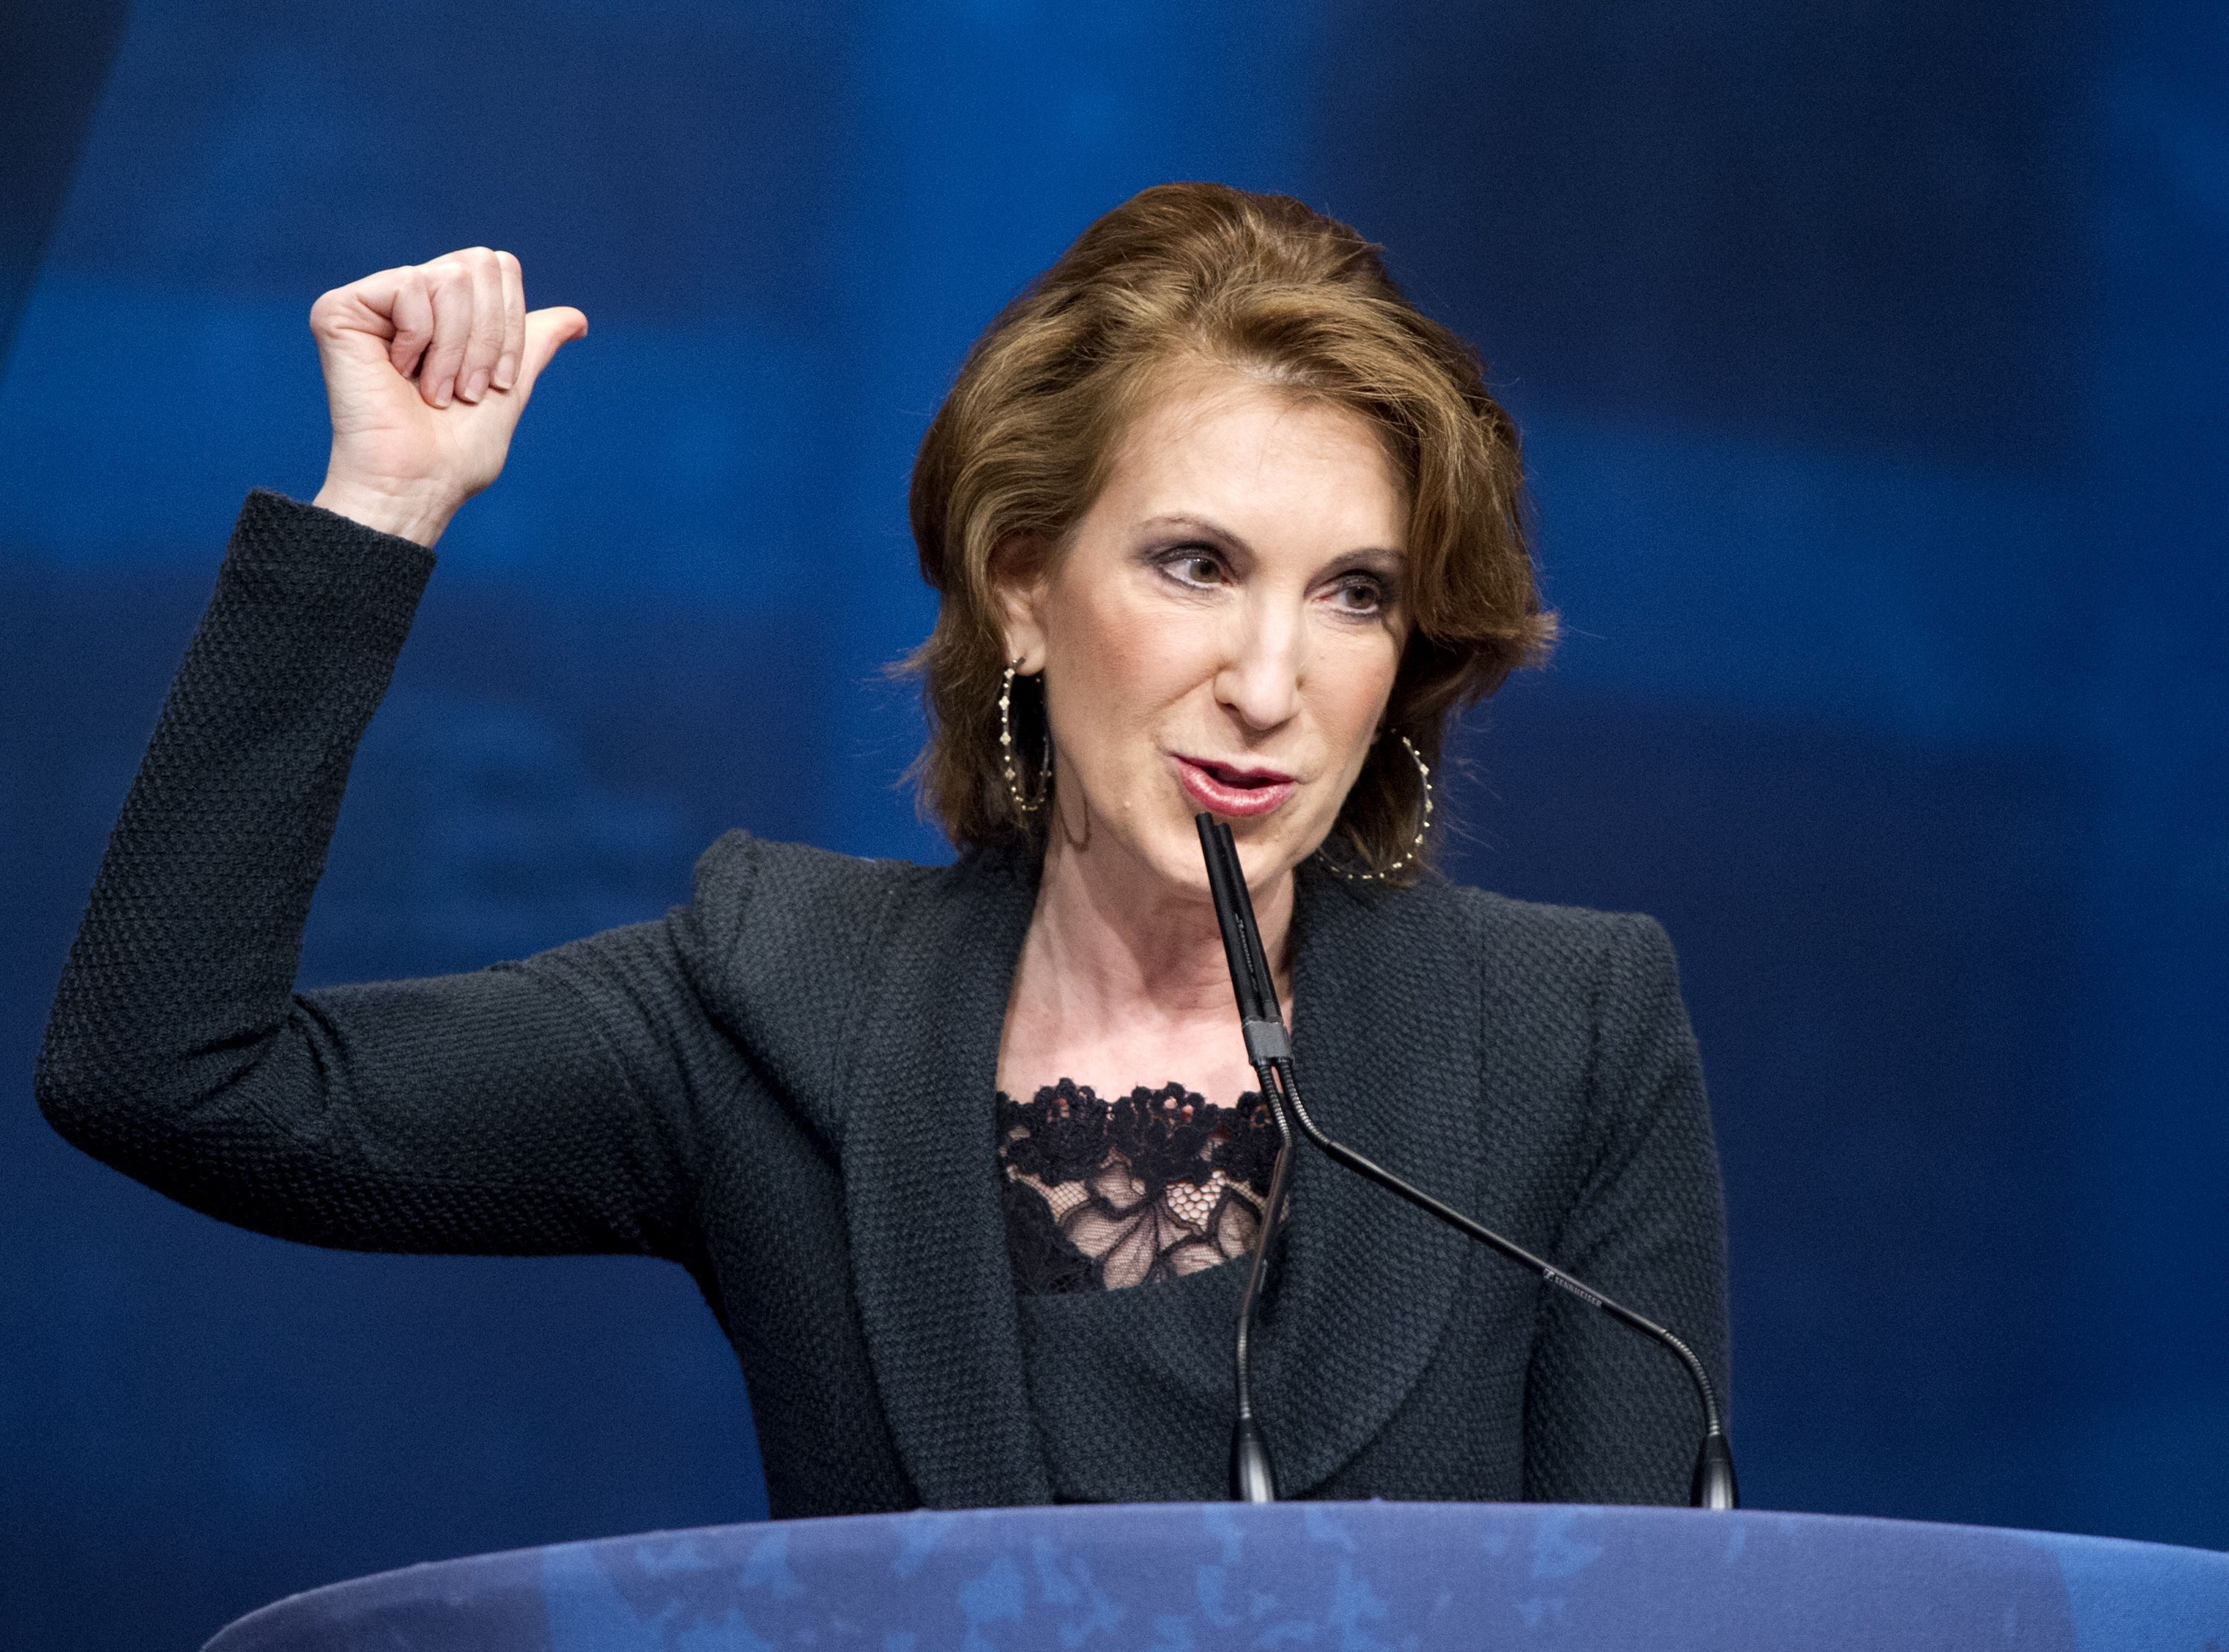 Carly Fiorina, Board Member, the American Conservative Union, Vice Chair, National Republican Senatorial Committee (NRSC), and former Chief Executive Officer (CEO) Hewlett-Packard, makes remarks at the 2012 CPAC Conference Conservative Political Action Committee annual convention in Washington, DC, America - 10 Feb 2012 (Rex Features via AP Images)